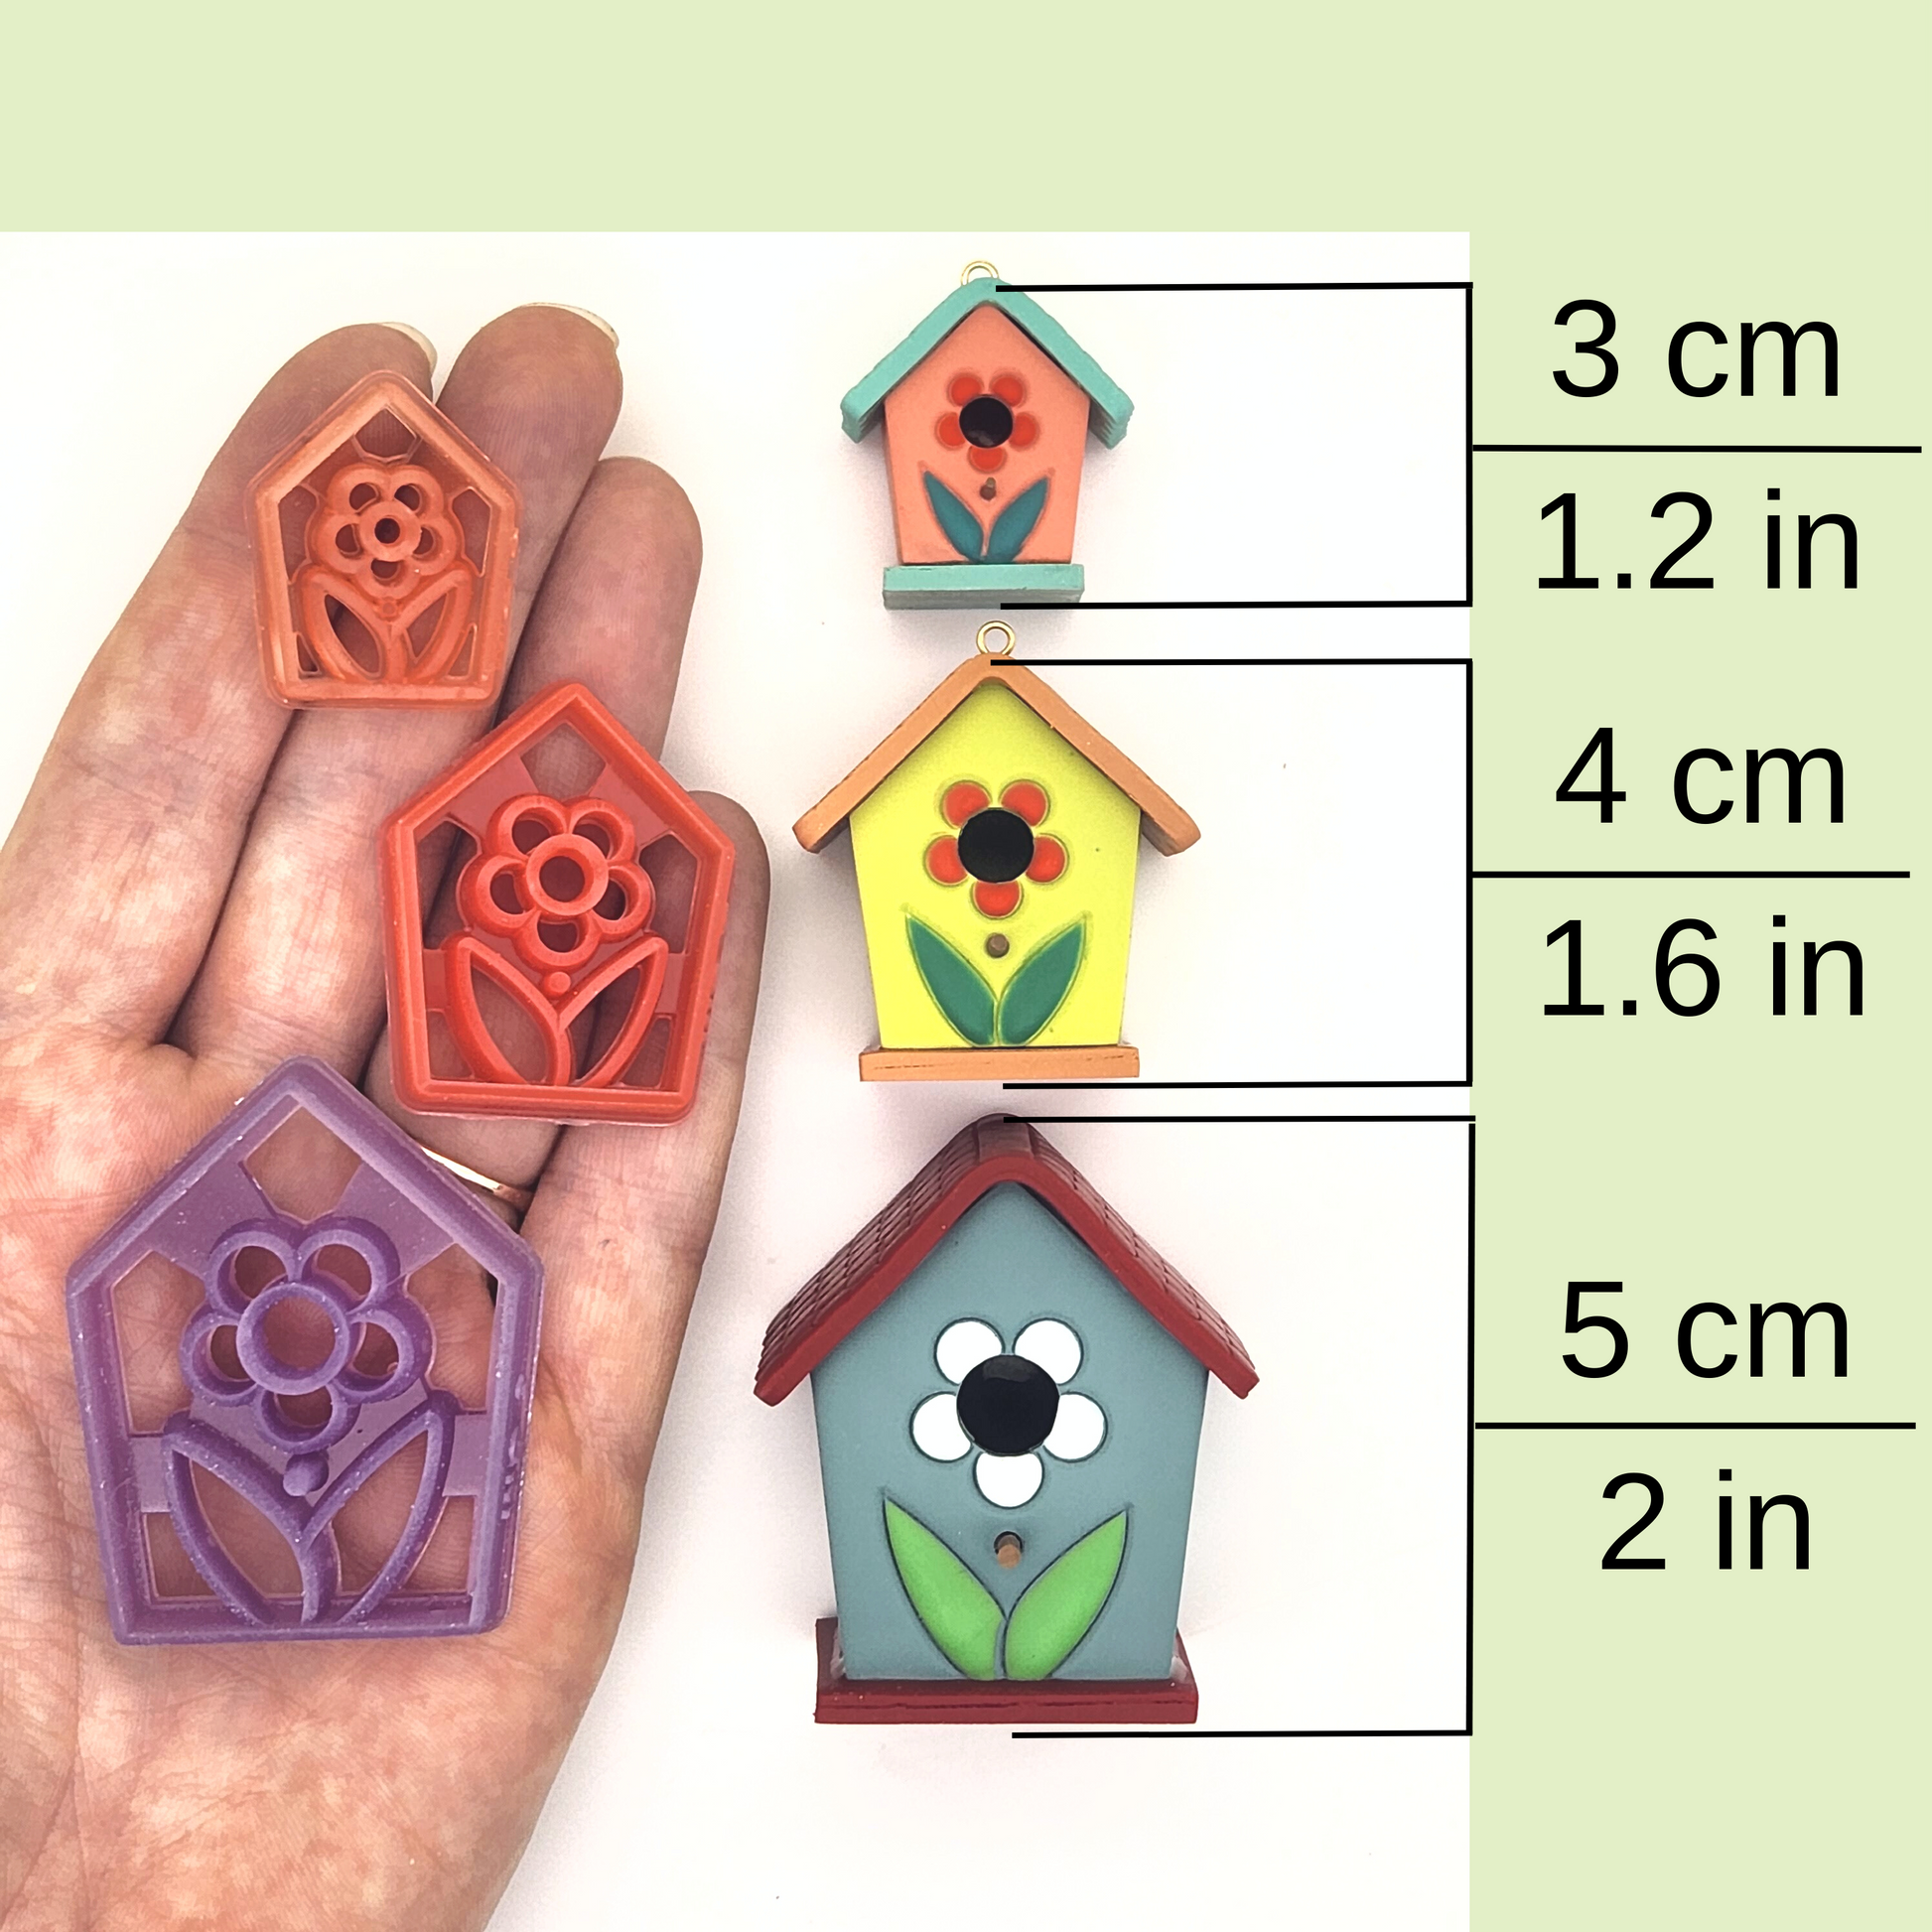 3D Birdhouse Kit is available in three sizes, 3cm / 1.2in, 4cm / 1.6in, and 5cm / 2in